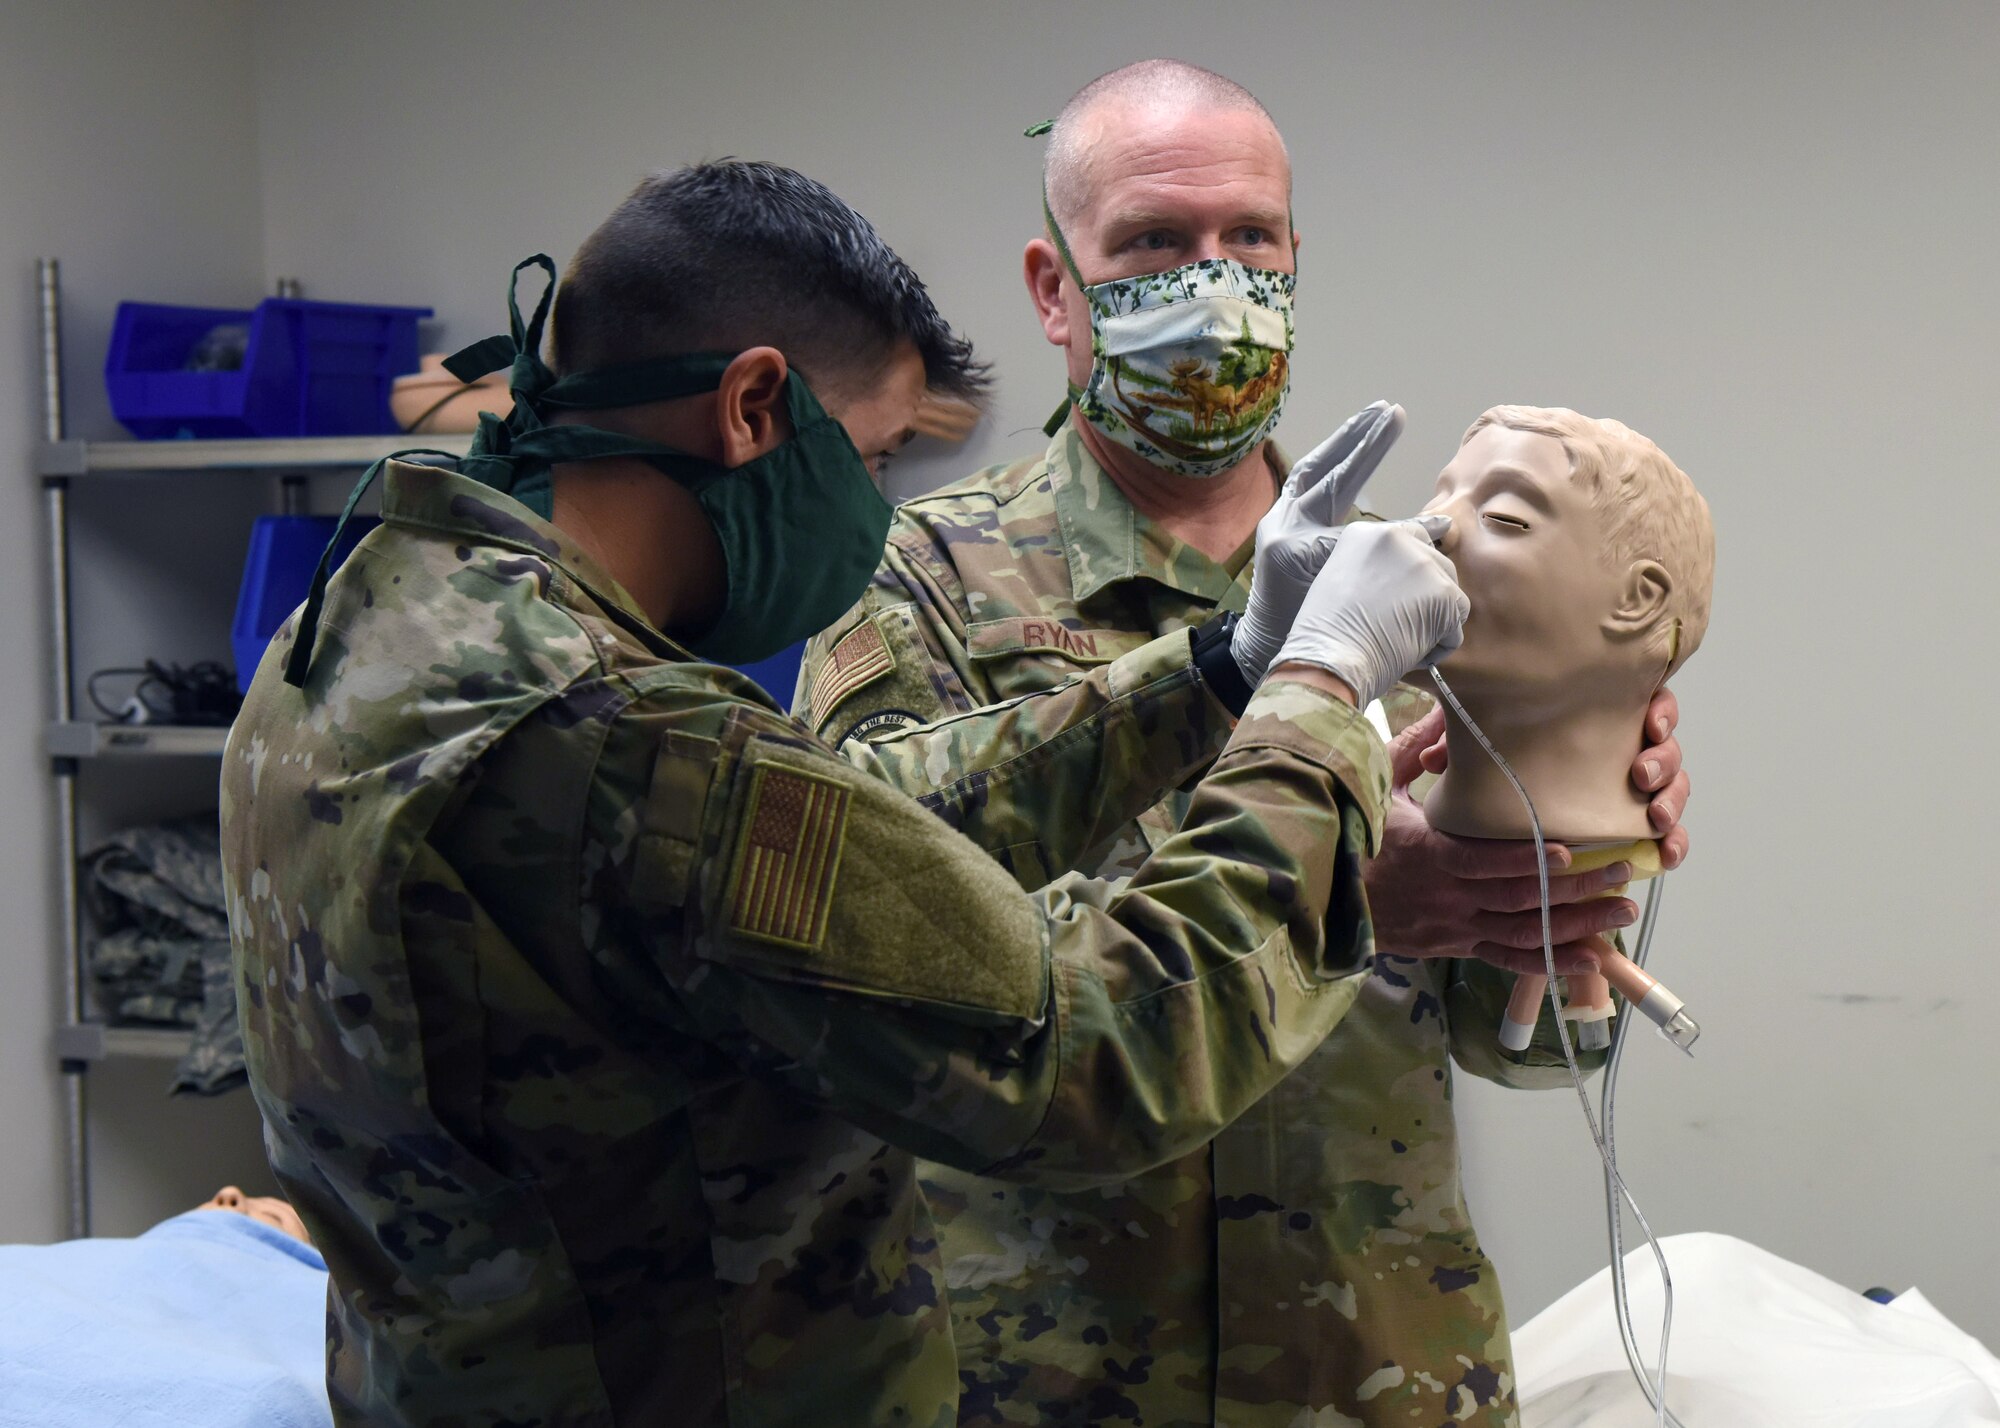 Staff Sgt. James McEneany, 460th Medical Group medical technician, inserts a nasogastric tube into a mannequin, while Maj. Michael Ryan, 460th Medical Group education training officer, provides support at the Human Performance Center on Buckley Air Force Base, Colo., May 6, 2020. Members from the 460th MDG participated in a hand-ons training to provide medical technicians with skills that will benefit them with inpatient treatment in case they have to provide support for COVID-19 elsewhere. (U.S. Air Force photo by Airman 1st Class Haley N. Blevins)